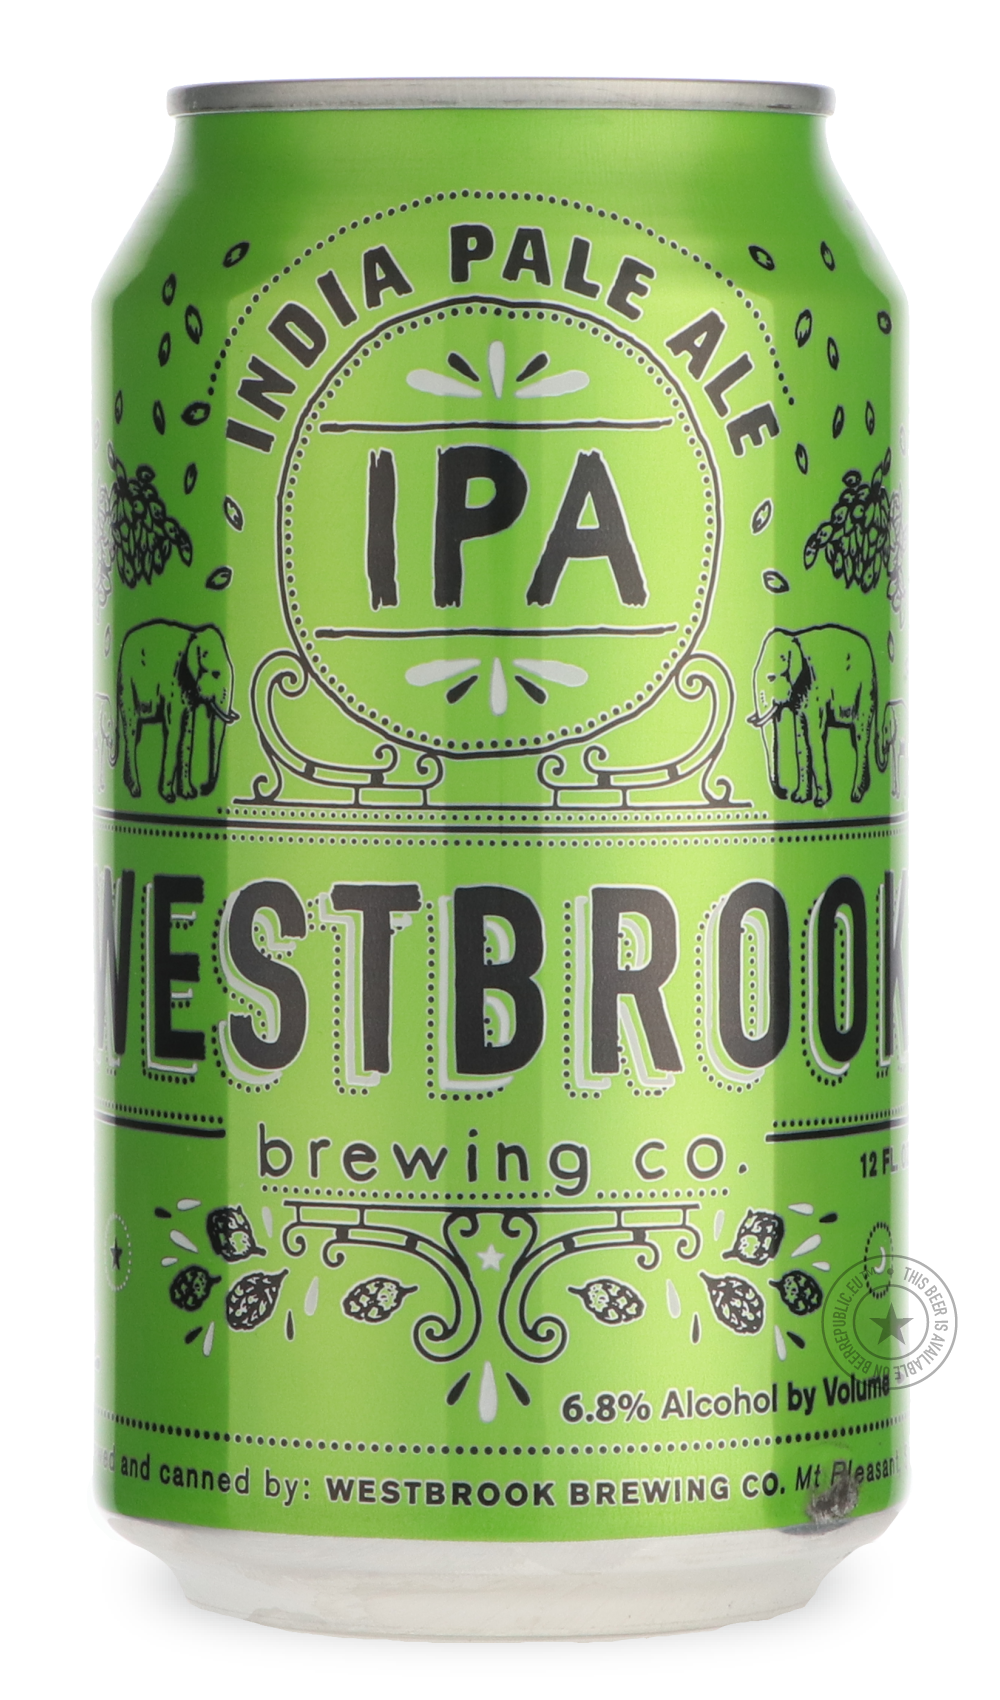 -Westbrook- IPA-IPA- Only @ Beer Republic - The best online beer store for American & Canadian craft beer - Buy beer online from the USA and Canada - Bier online kopen - Amerikaans bier kopen - Craft beer store - Craft beer kopen - Amerikanisch bier kaufen - Bier online kaufen - Acheter biere online - IPA - Stout - Porter - New England IPA - Hazy IPA - Imperial Stout - Barrel Aged - Barrel Aged Imperial Stout - Brown - Dark beer - Blond - Blonde - Pilsner - Lager - Wheat - Weizen - Amber - Barley Wine - Qua